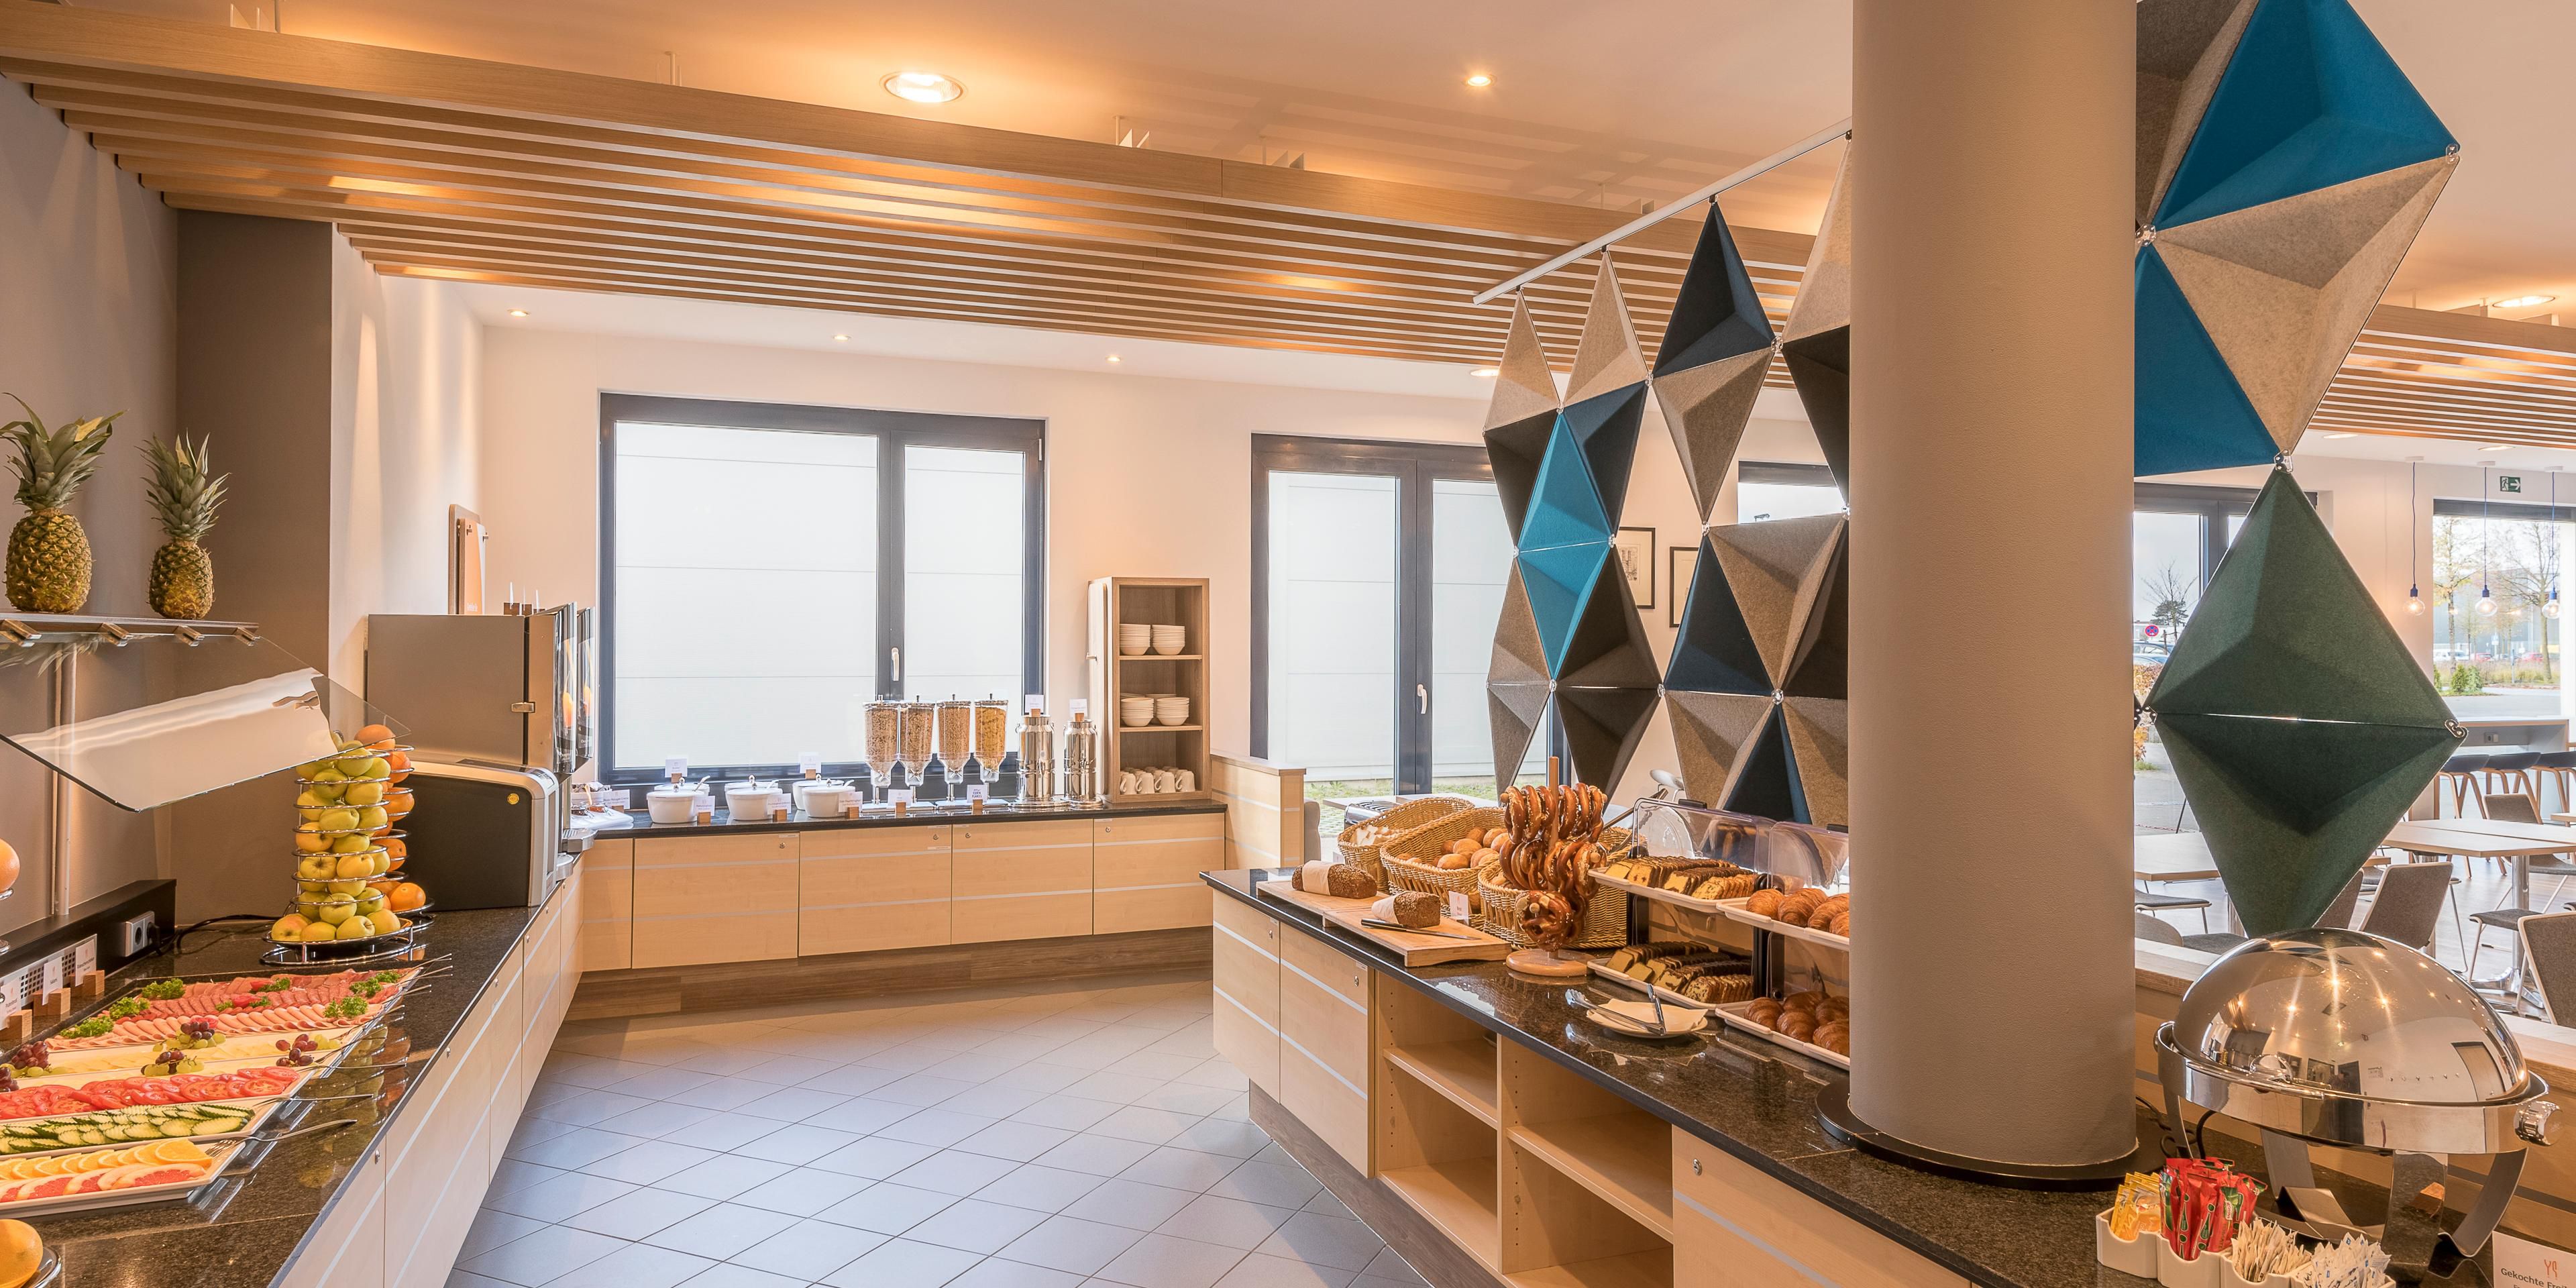 Head to the Great Room each morning for an included Express Start™ Breakfast. This continental buffet offers fluffy croissants and pastries, plus local cold cuts, eggs, cheeses and fresh fruit.